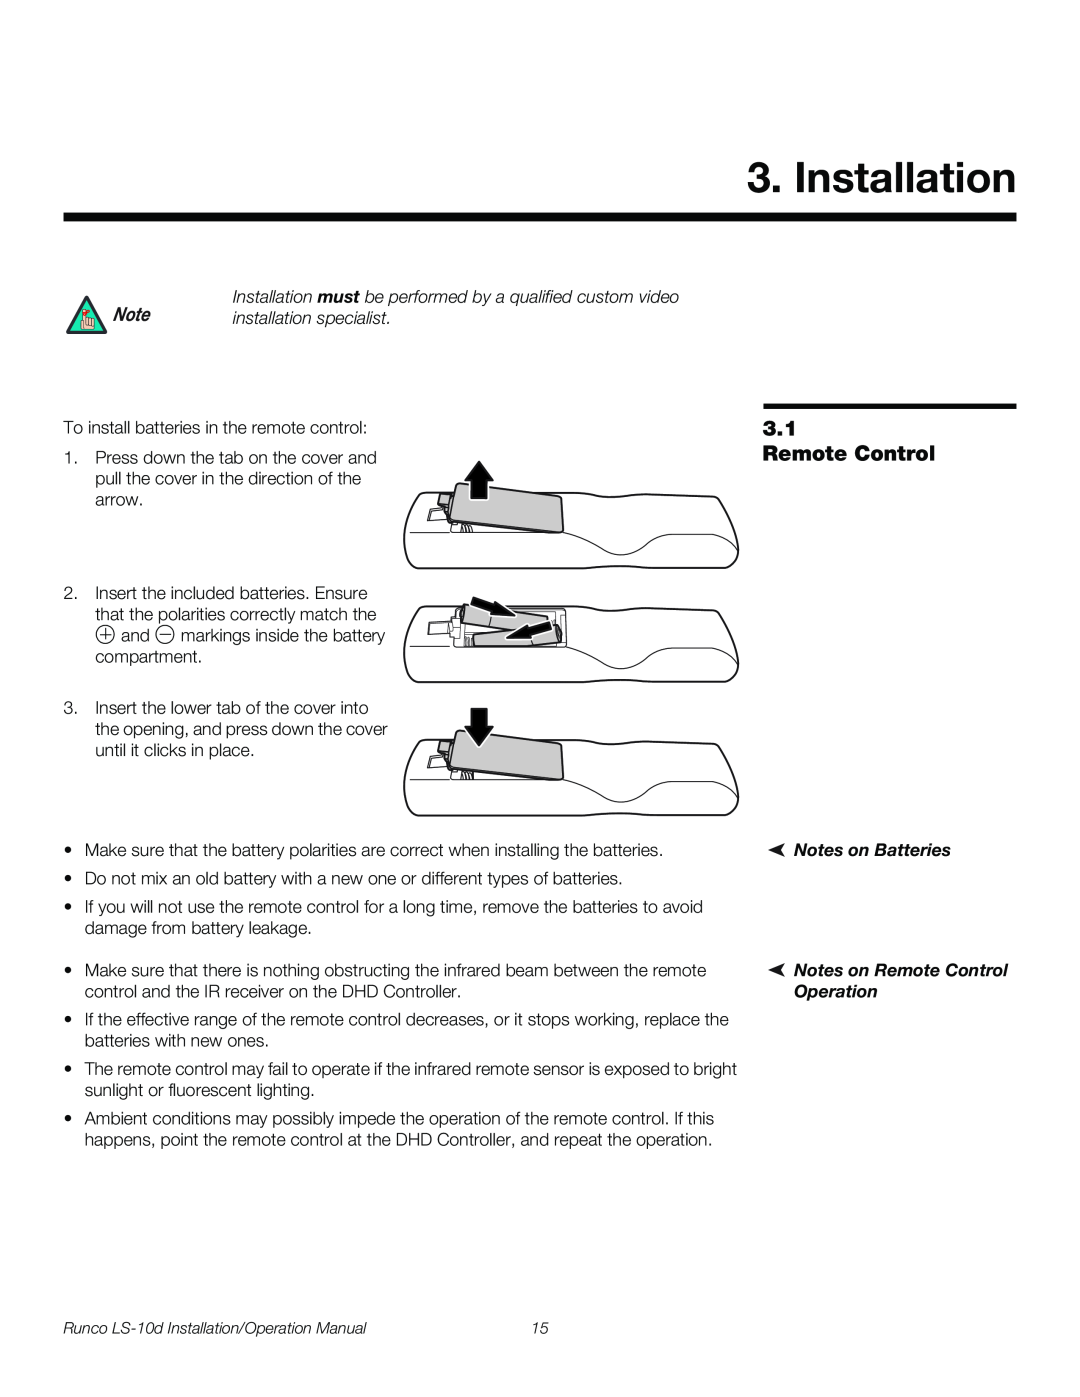 Runco LS-10D Installation, installation specialist, Notes on Batteries Notes on Remote Control Operation 